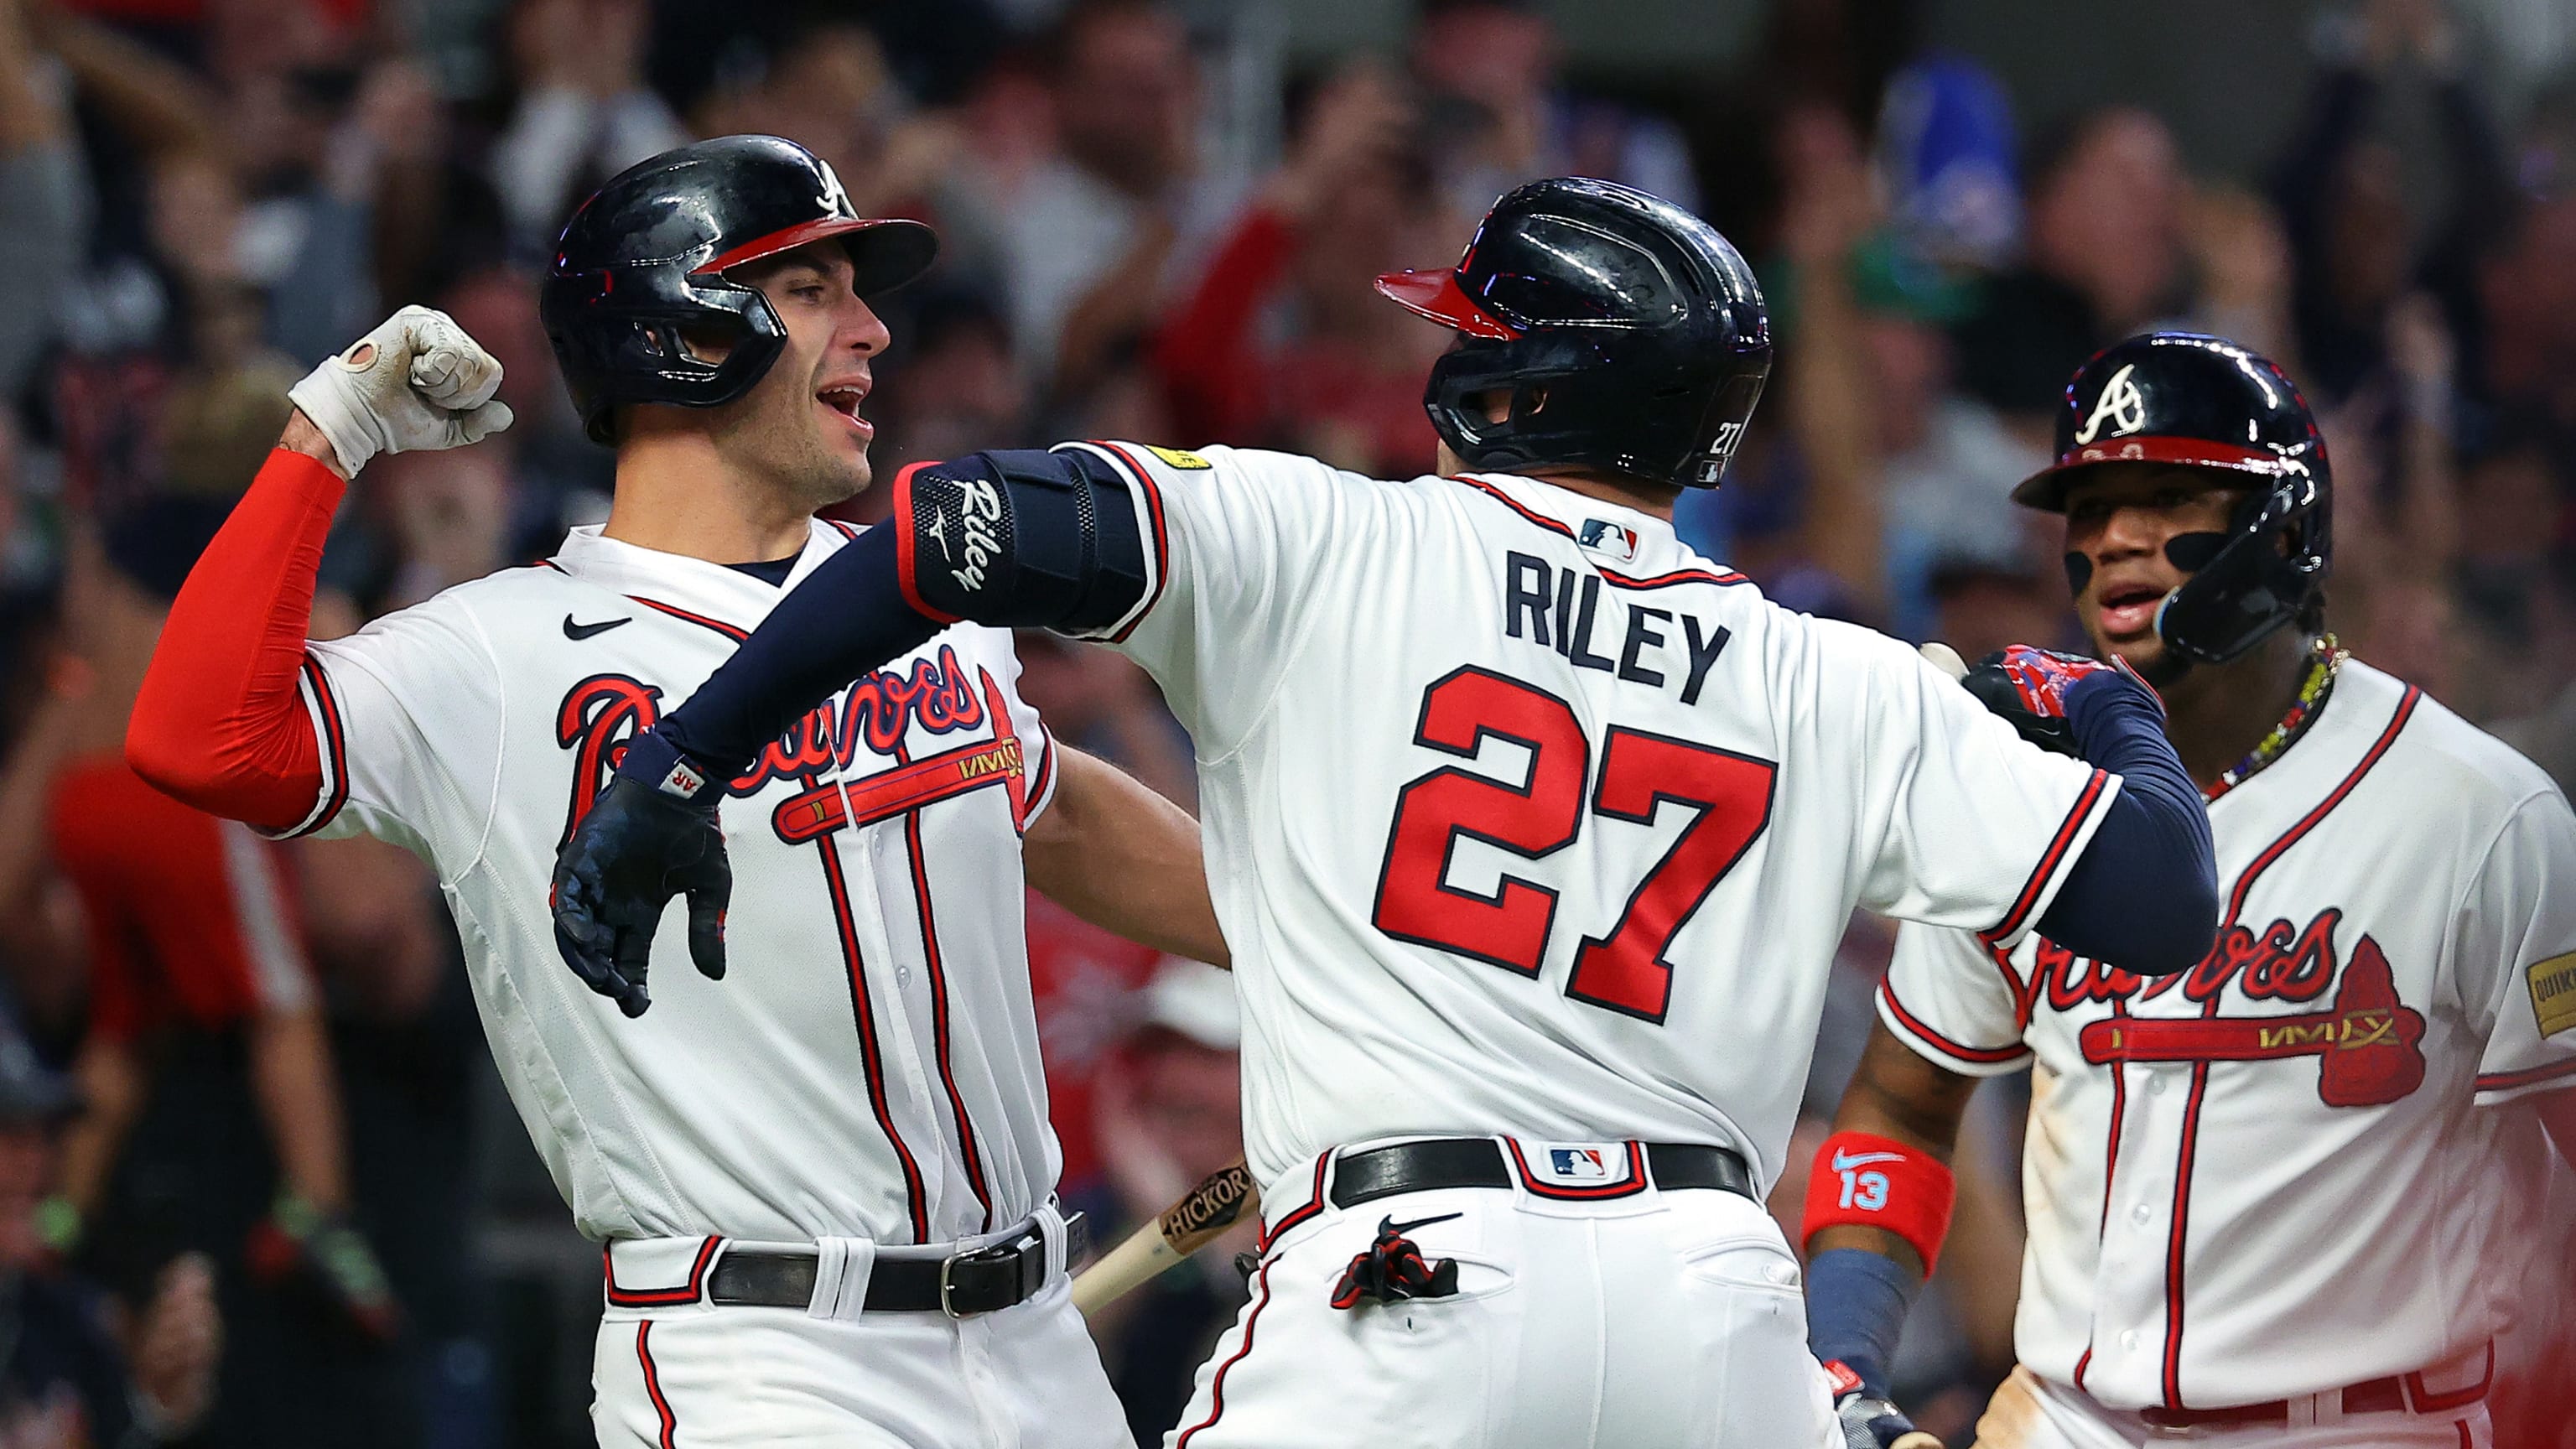 Braves walk off with 2-0 NL lead